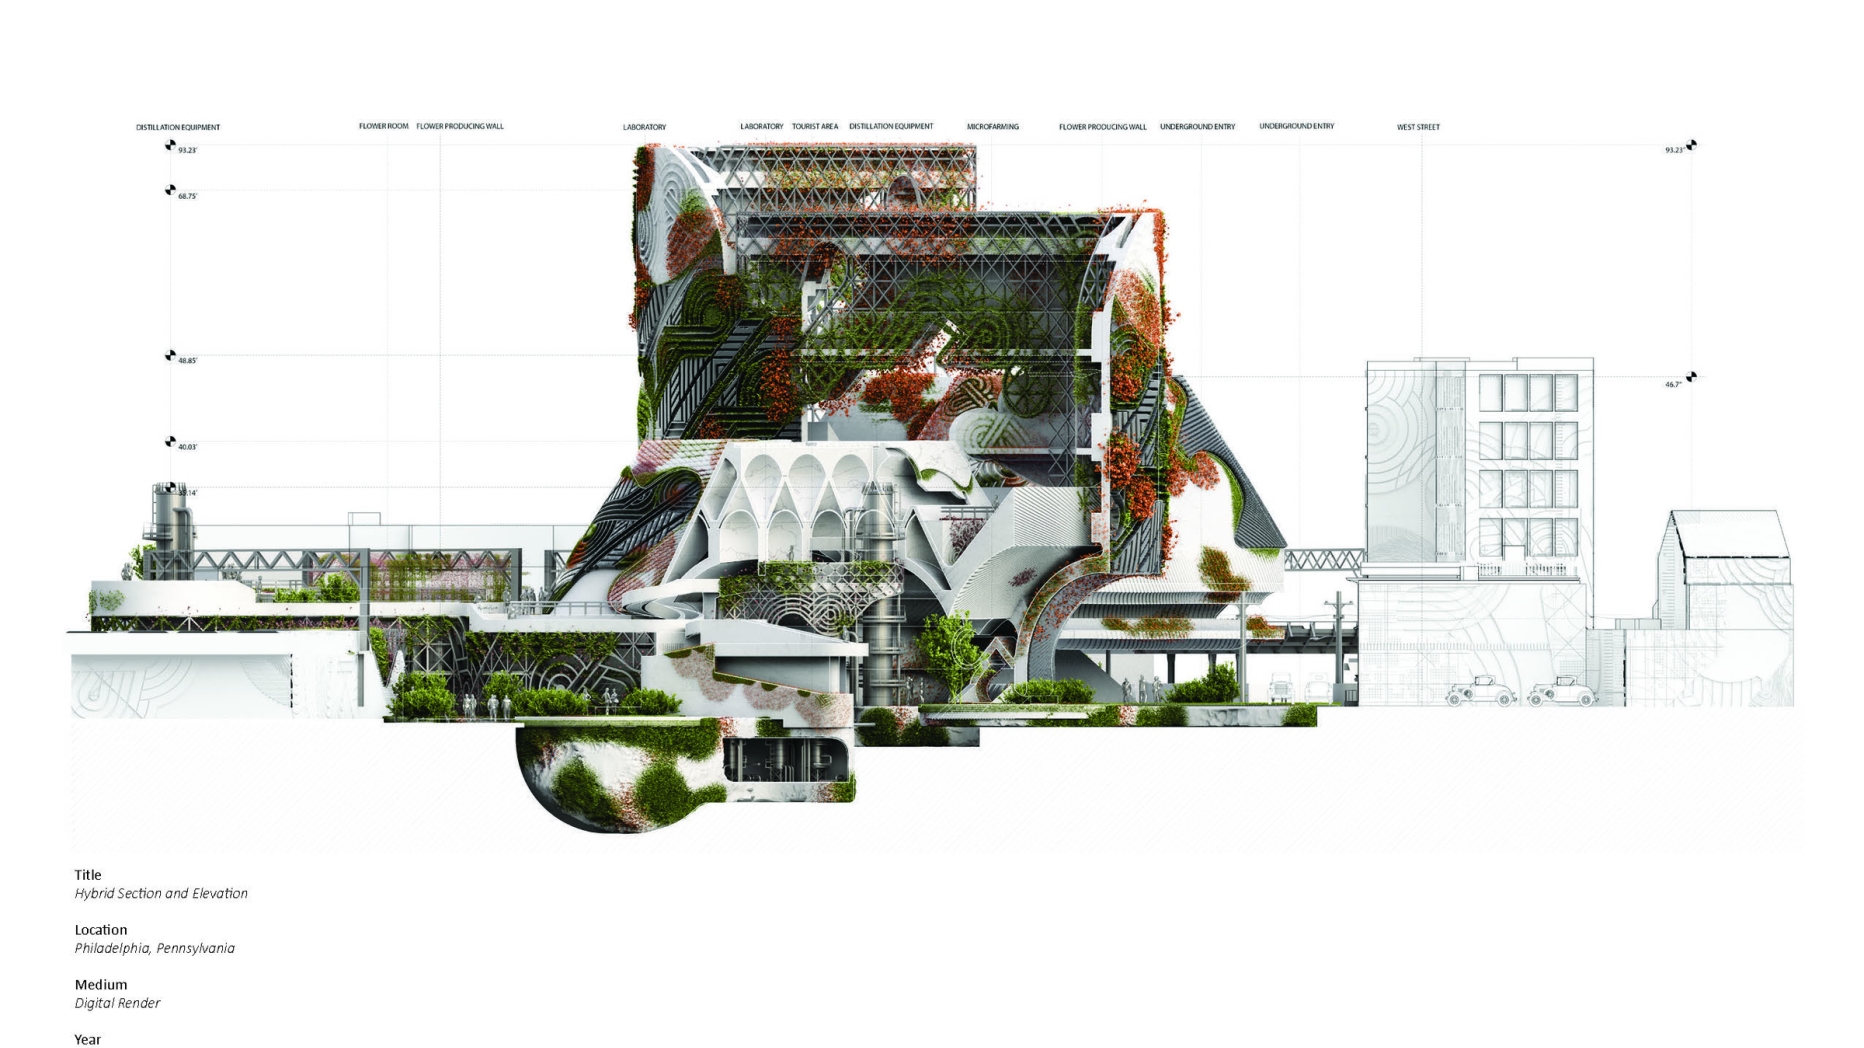 Patterned surfaces and plant covered walls come together to create an enormous multi-building structure